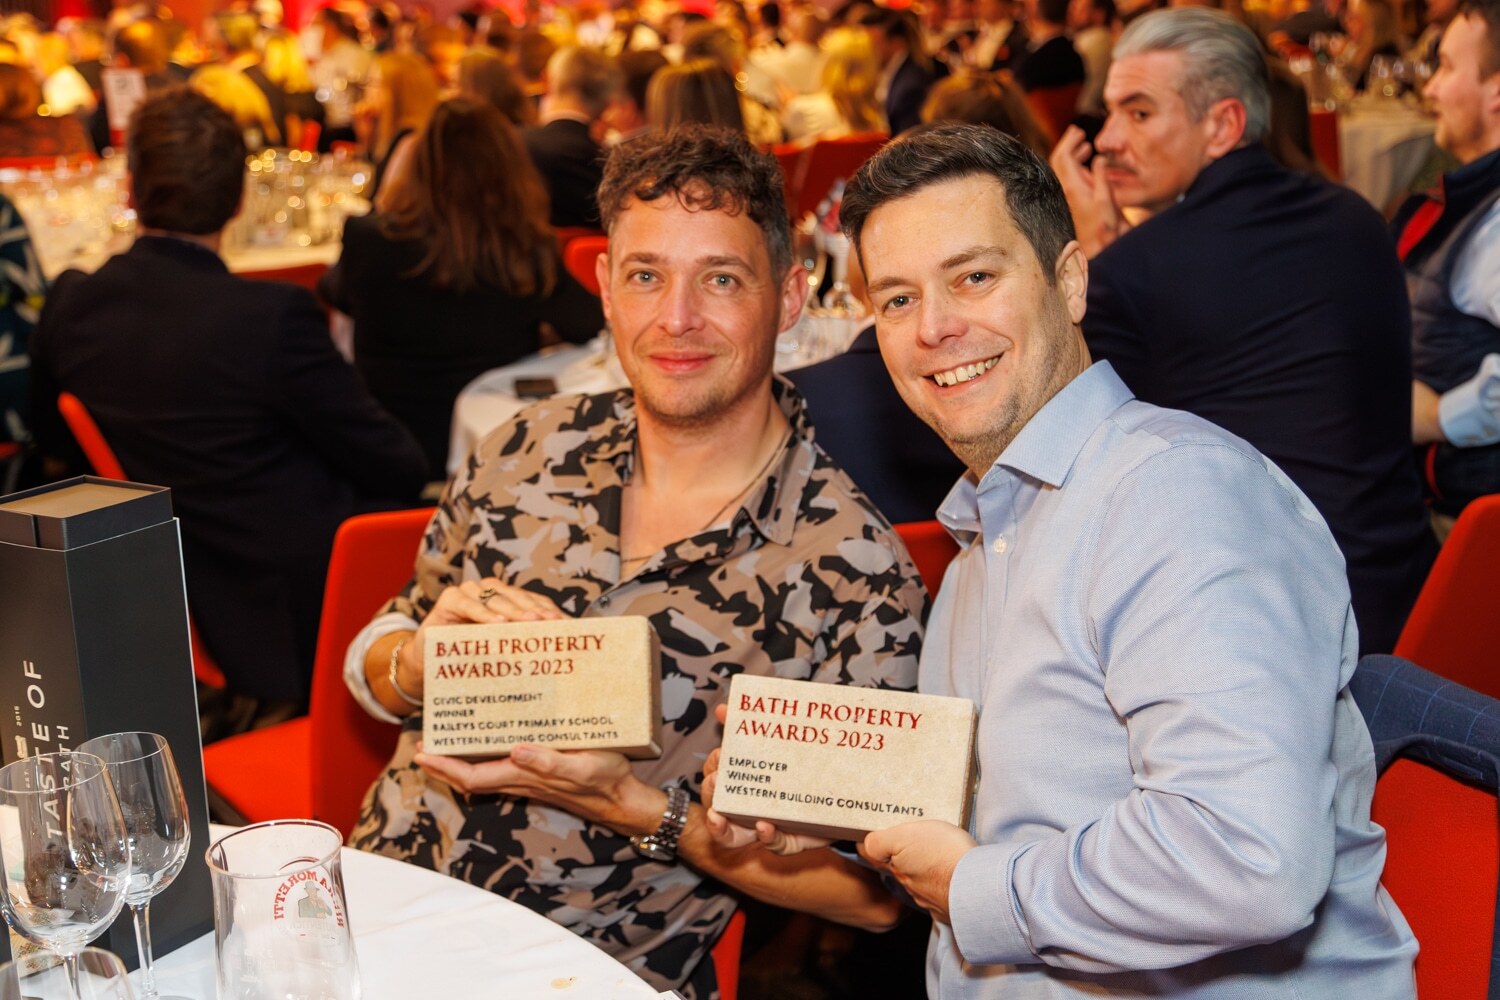 Bath Property Awards Best Employer & Civic Award 2023 Western Building Consultants